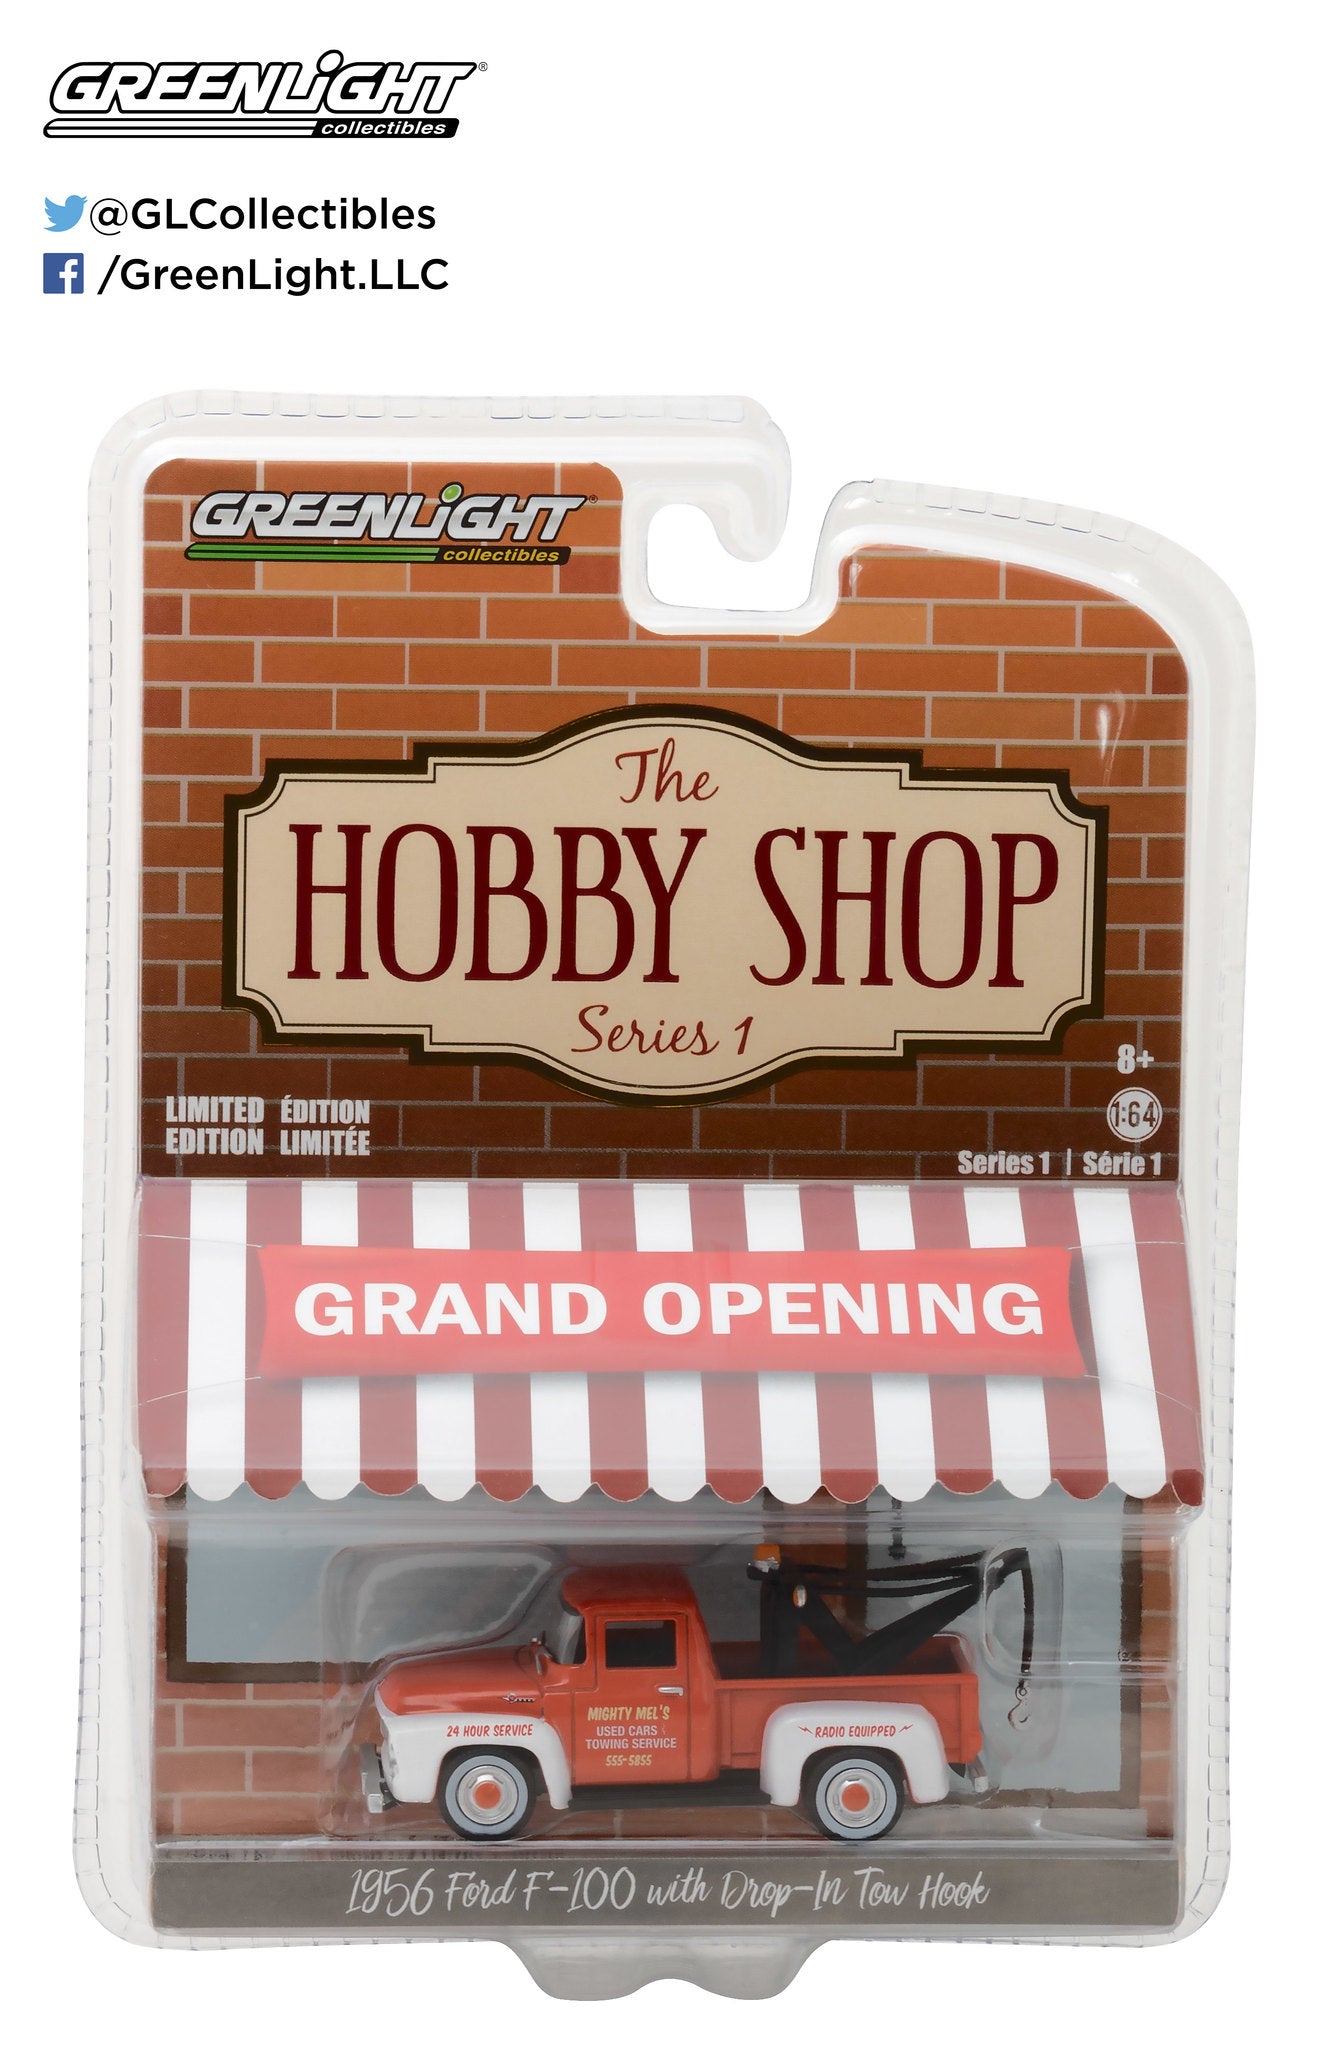 GreenLight 1:64 The Hobby Shop Series 1 - 1956 Ford F-100 with Drop-in Tow Hook 97010-A